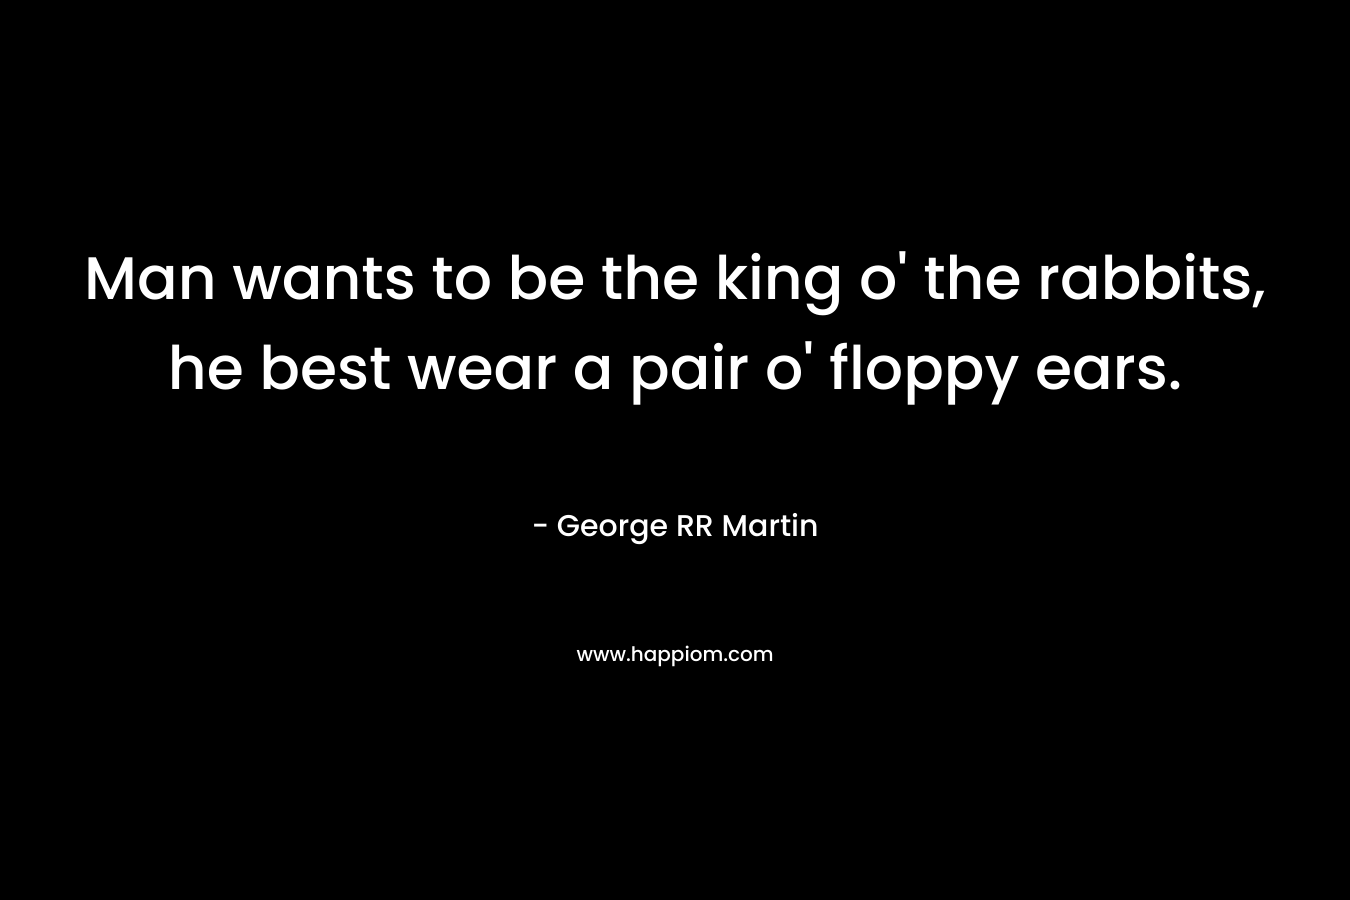 Man wants to be the king o' the rabbits, he best wear a pair o' floppy ears.